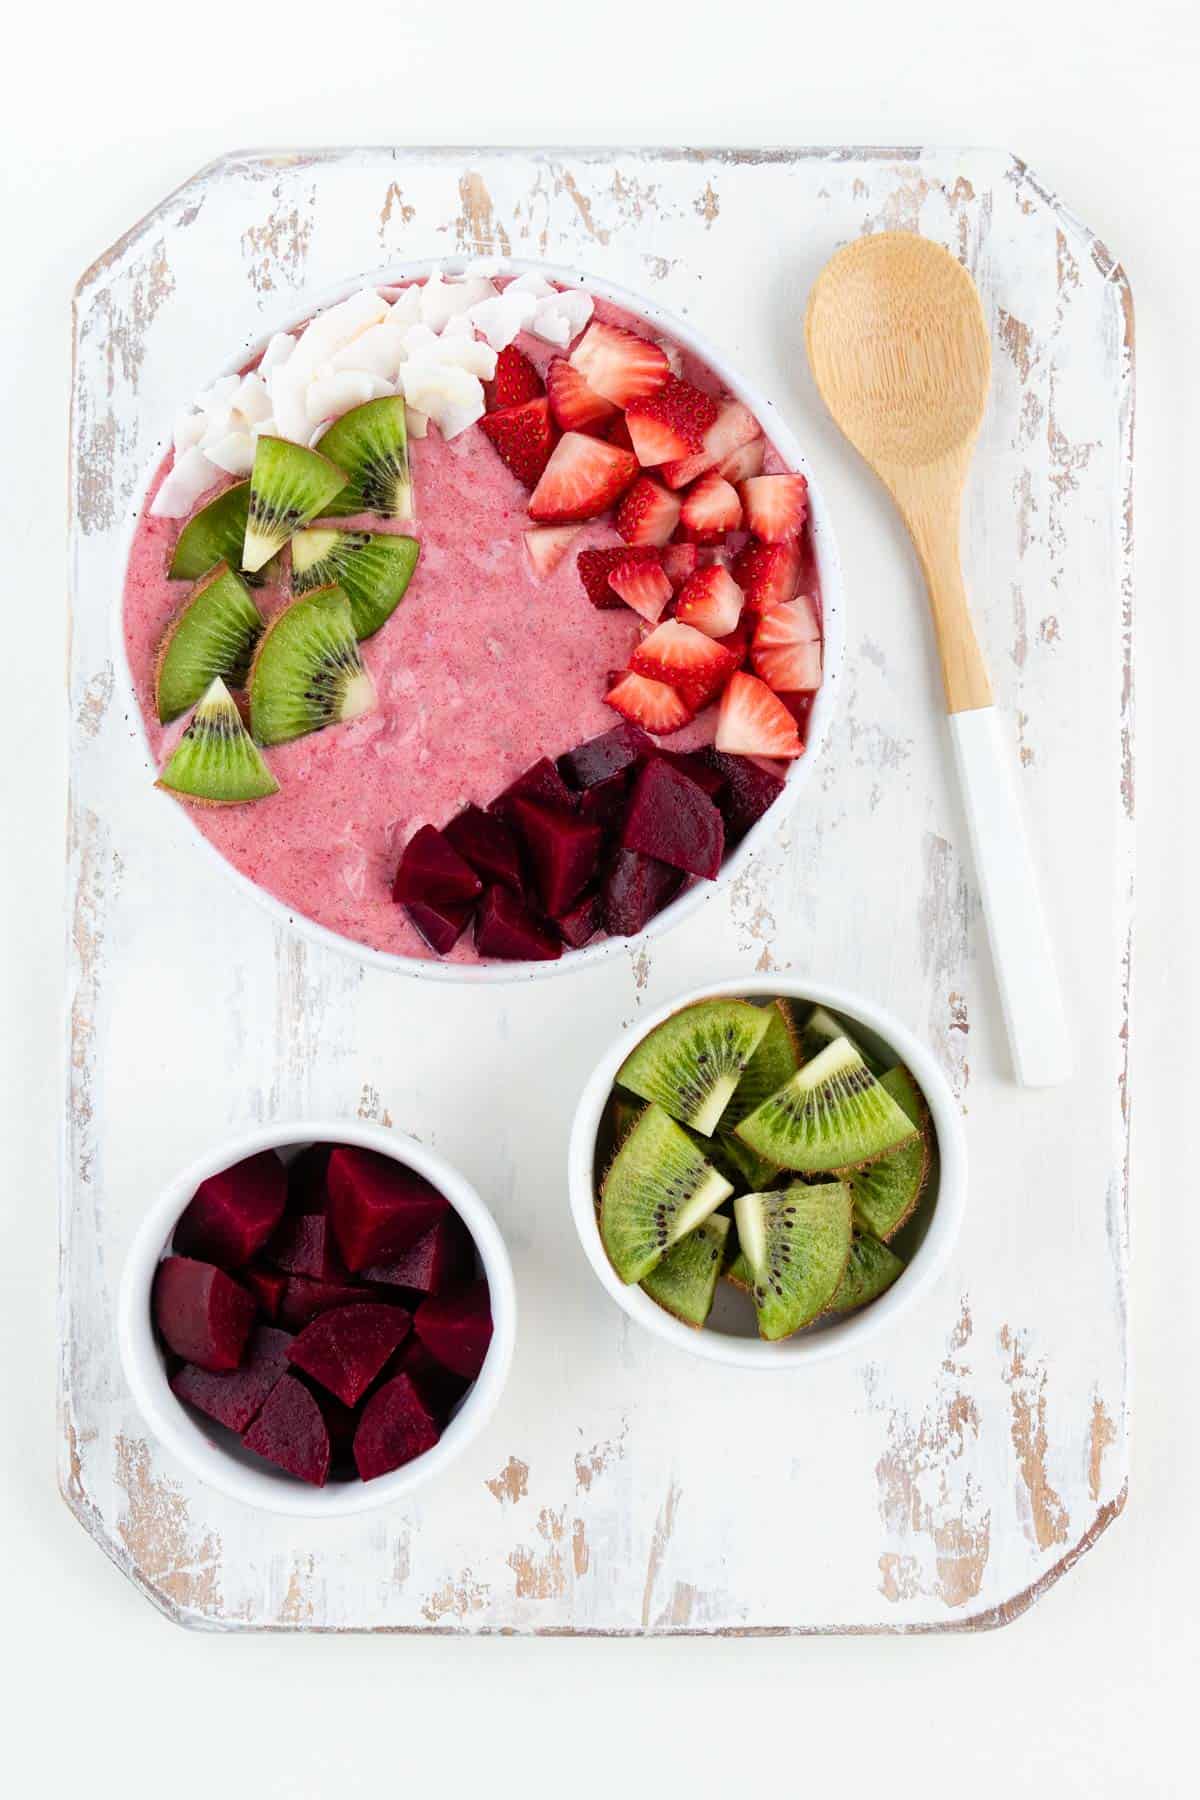 a pink smoothie bowl, wooden spoon, and two bowls filled with beets and kiwi on top of a white distressed cutting board